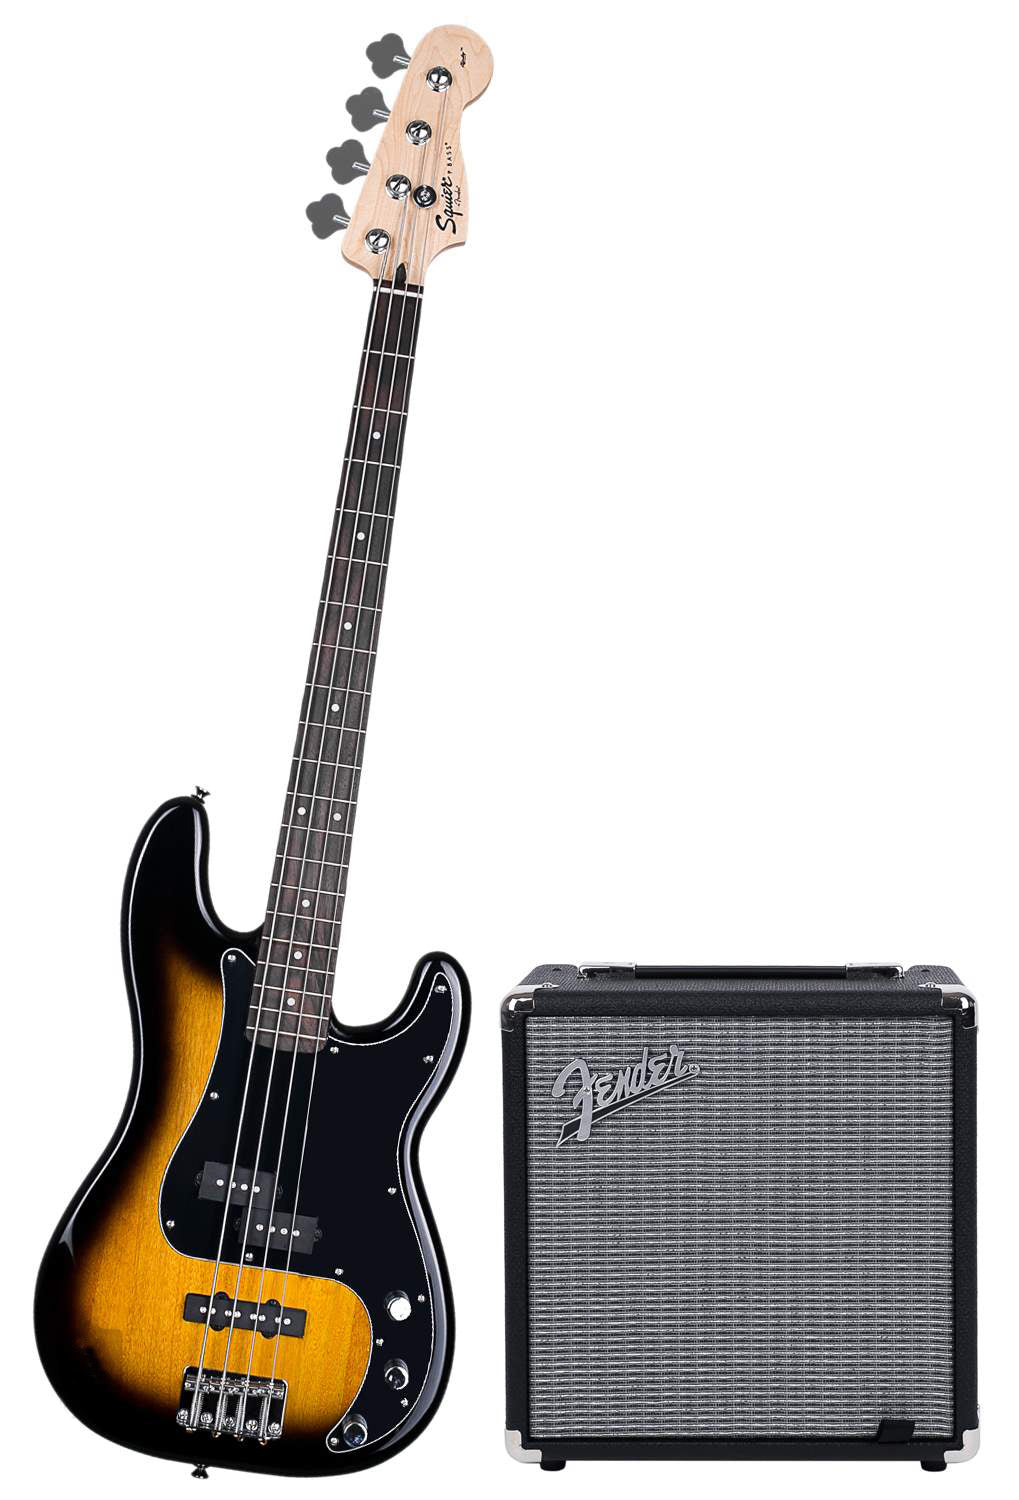 Fender Squier Affinity Series Precision Electric Bass Guitar PJ with Rumble 15-Watts Amplifier and Gig Bag Package (BROWN SUNBURST) PK BASSGB R15 BSB